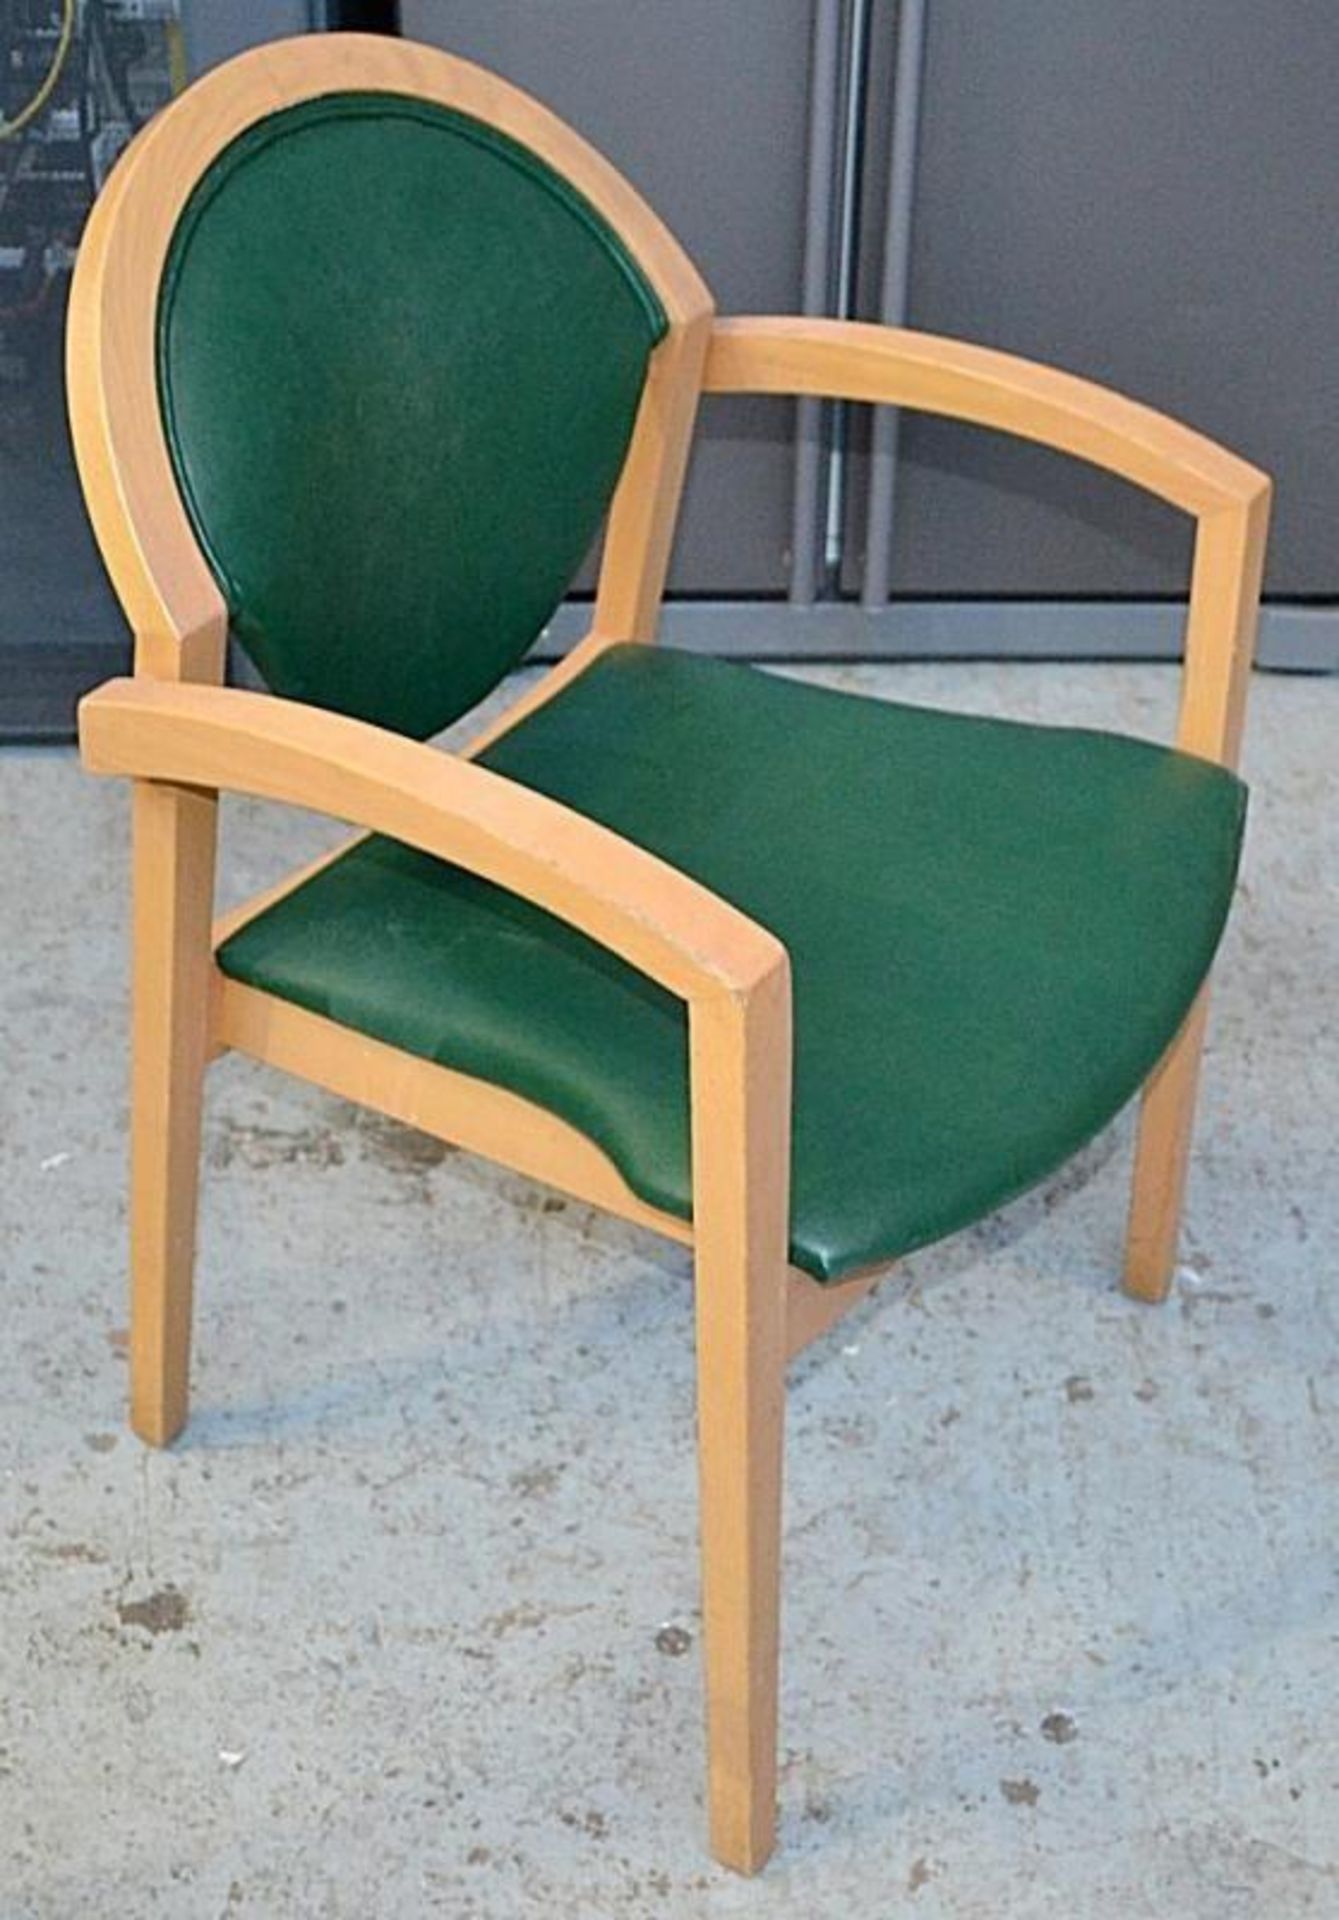 3 x Matching Wooden Chairs Upholstered Green Faux Leather - Dimensions: W57.5 x D50 x H86 x SH46cm - - Image 8 of 8